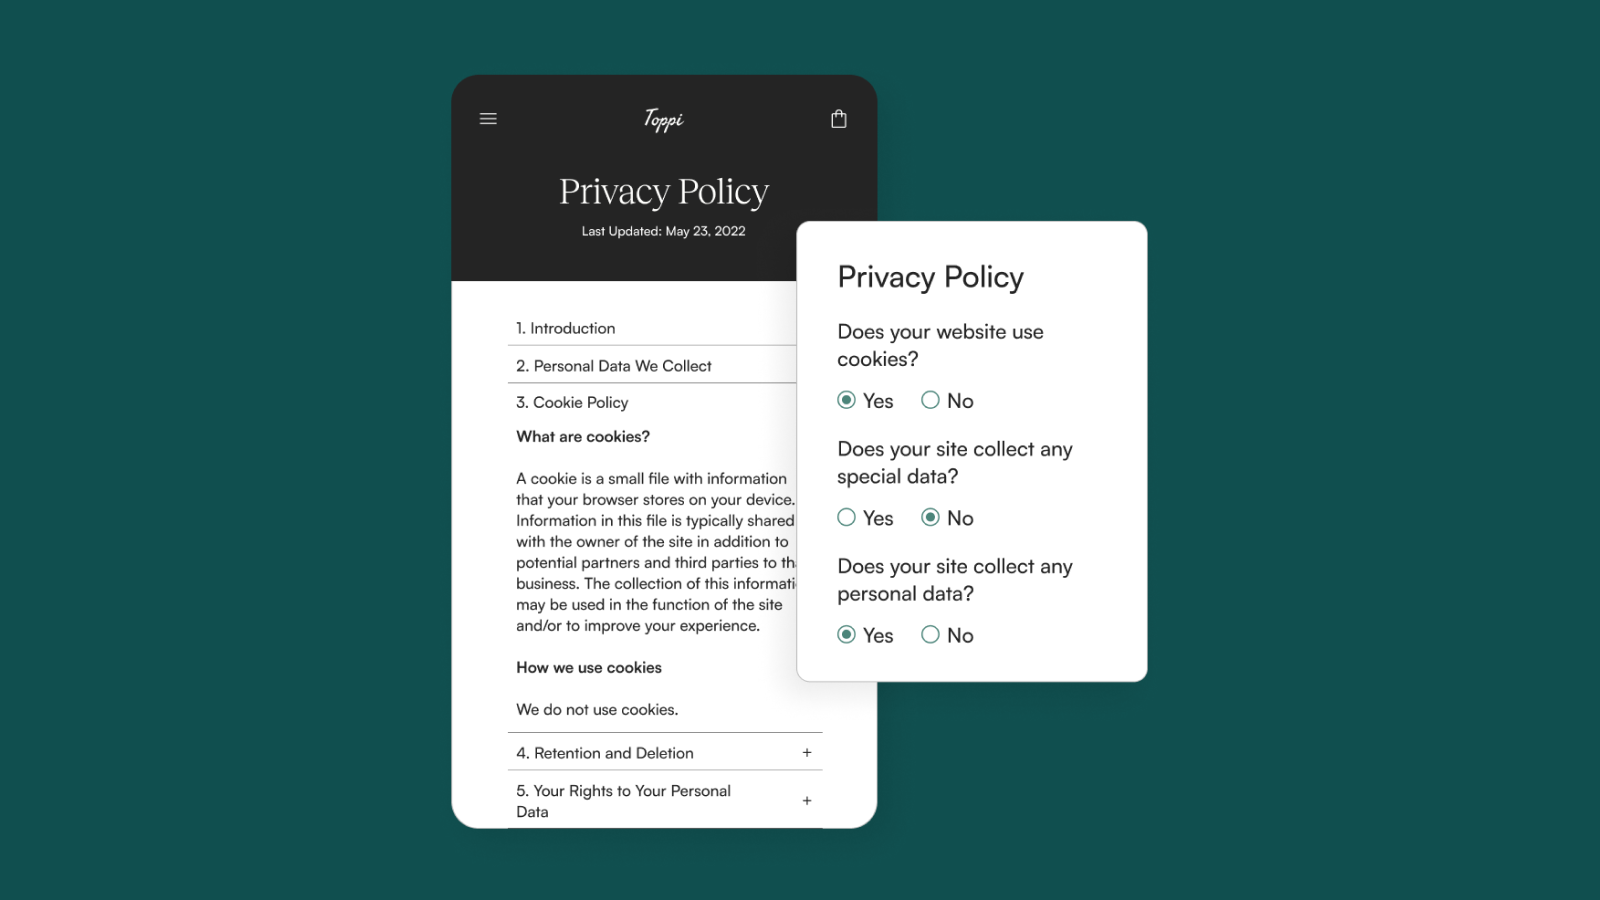 Mobile friendly privacy policy for CCPA and GDPR compliance